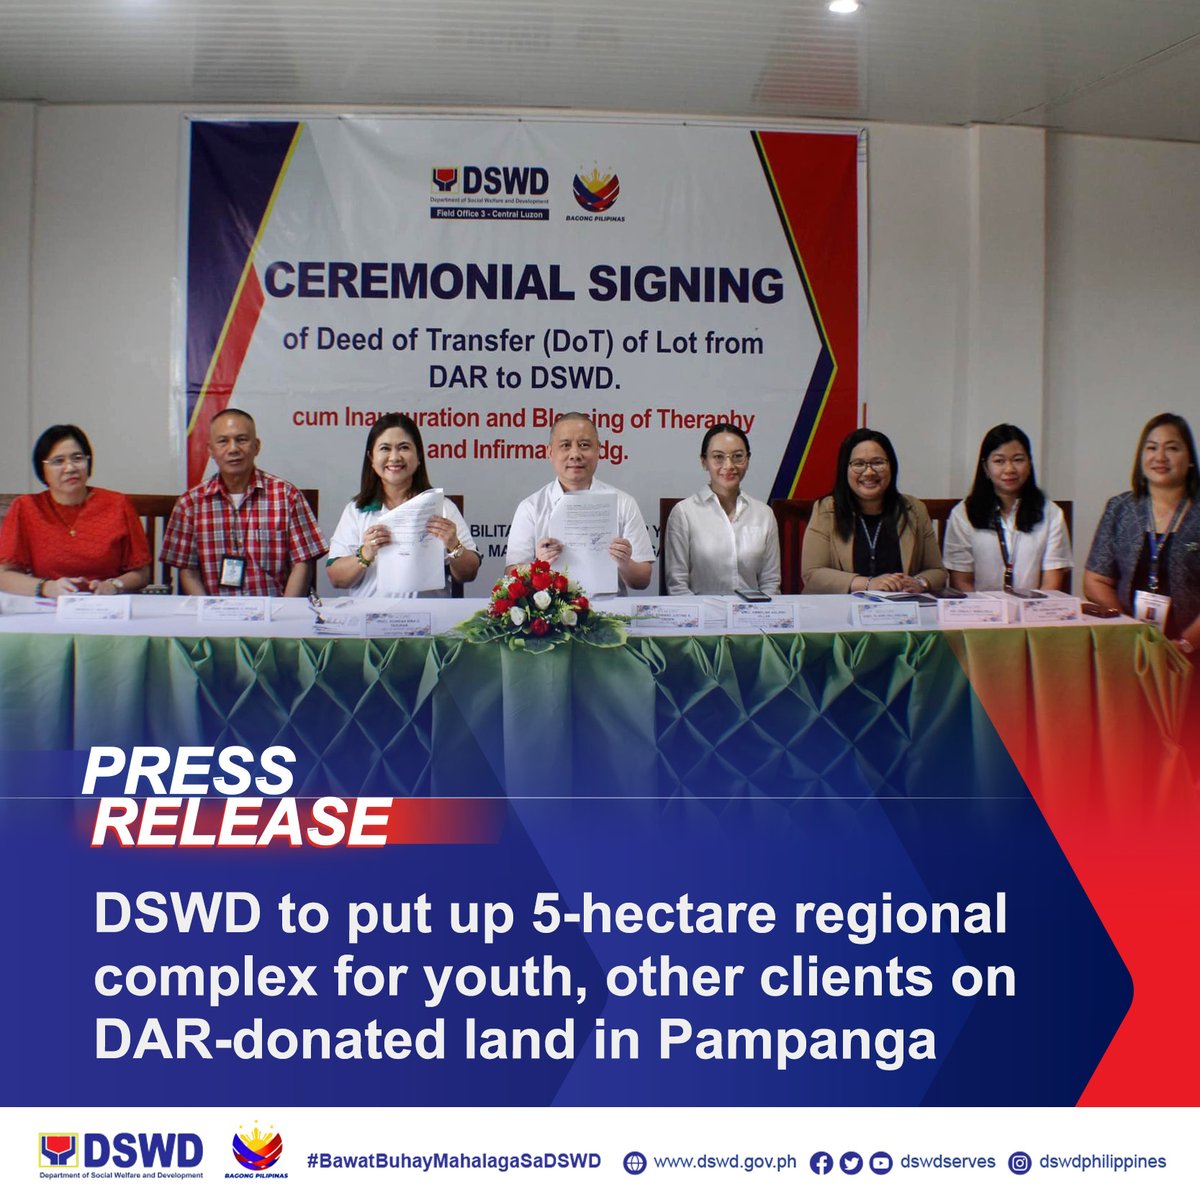 𝗗𝗦𝗪𝗗 𝗣𝗥𝗘𝗦𝗦 𝗥𝗘𝗟𝗘𝗔𝗦𝗘: DSWD to put up 5-hectare regional complex for youth, other clients on DAR-donated land in Pampanga The Department of Social Welfare and Development (DSWD) will soon build a regional complex on a 5-hectare land in Magalang, Pampanga donated by